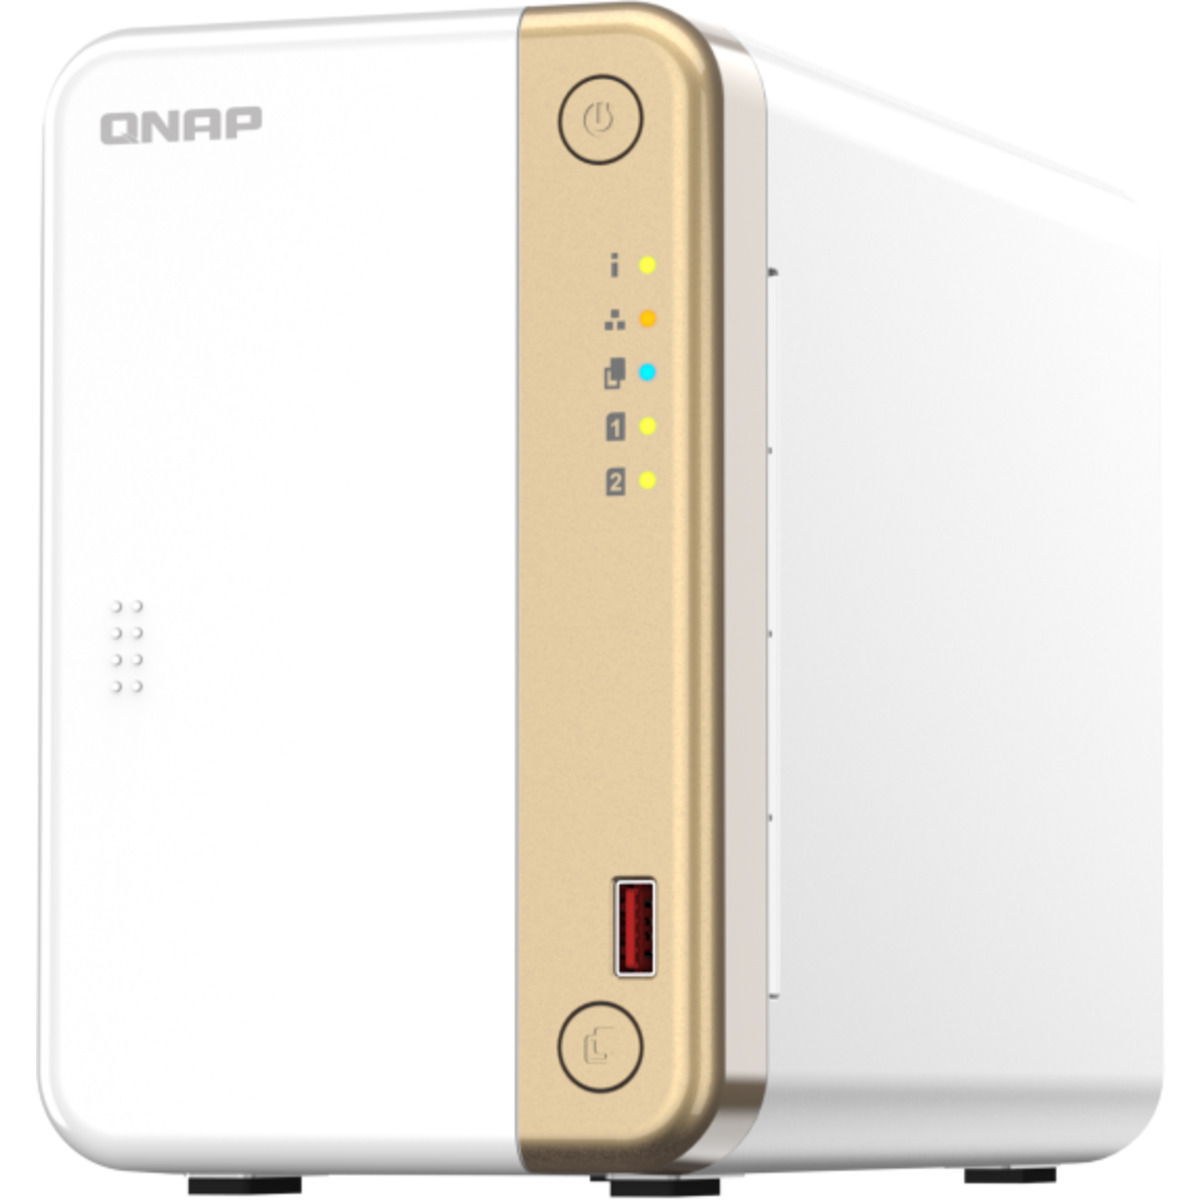 buy $1080 QNAP TS-262 32tb Desktop NAS - Network Attached Storage Device 2x16000gb Toshiba Enterprise Capacity MG08ACA16TE 3.5 7200rpm SATA 6Gb/s HDD ENTERPRISE Class Drives Installed - Burn-In Tested - nas headquarters buy network attached storage server device das new raid-5 free shipping simply usa TS-262